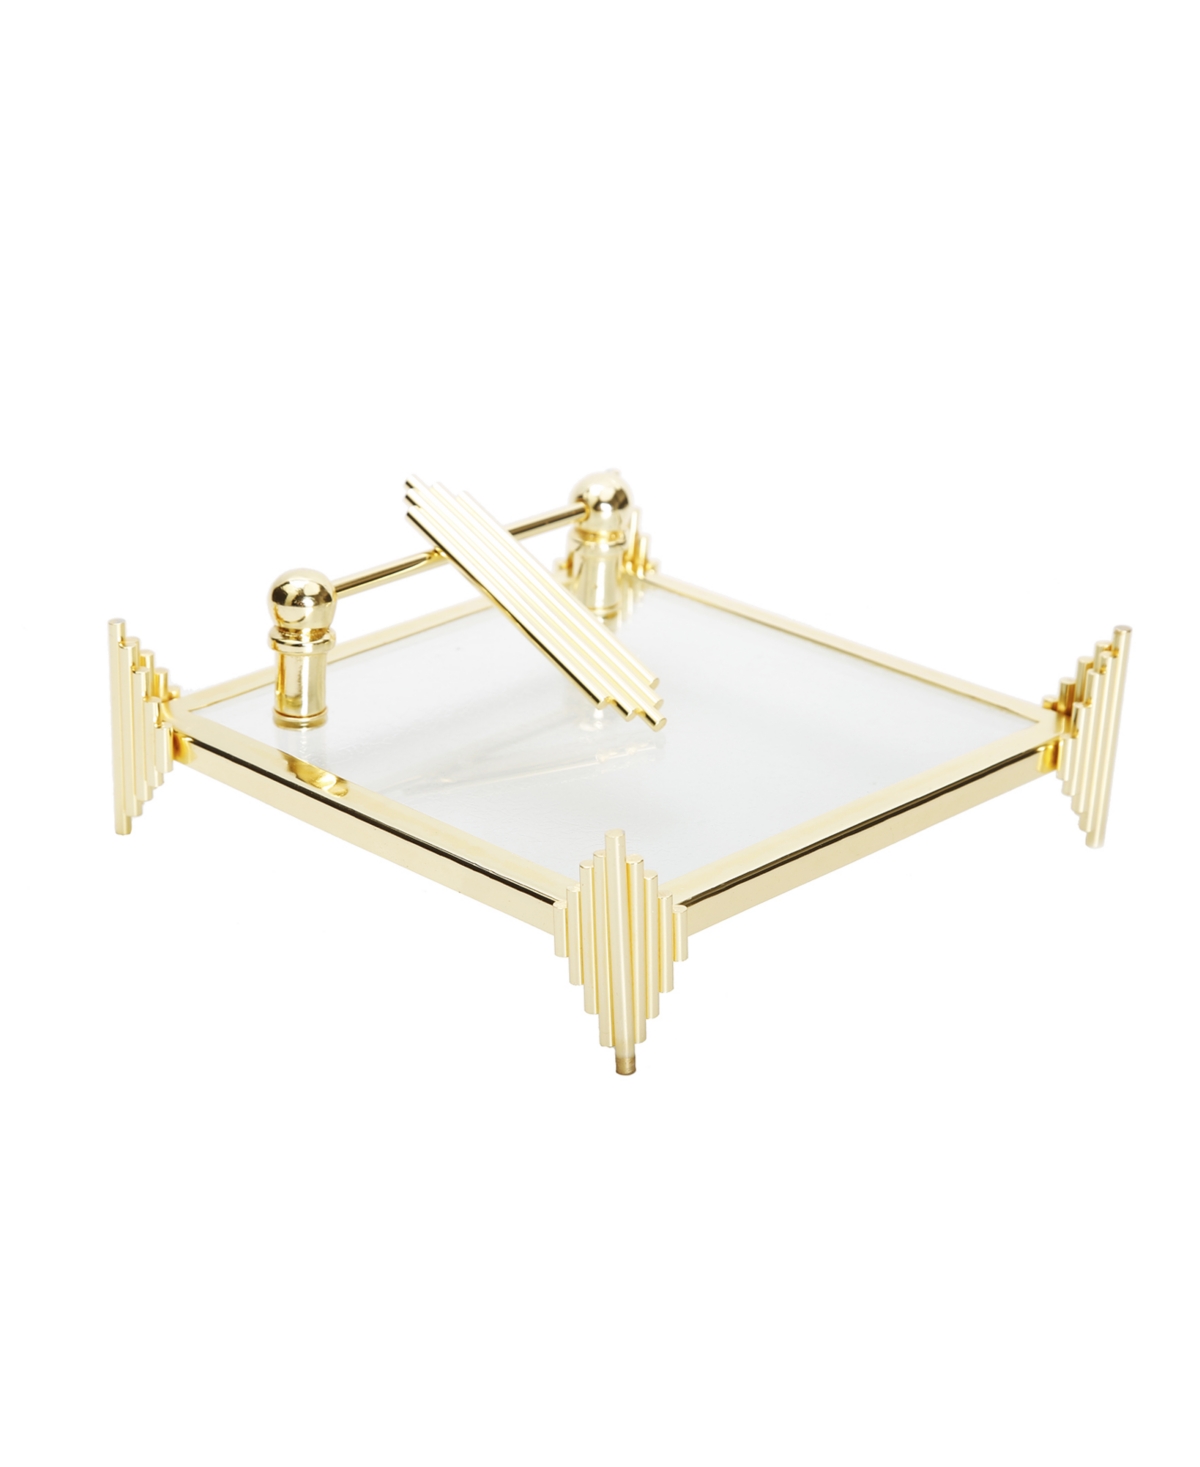 Shop Classic Touch Symmetrical Design Square Napkin Holder In Gold